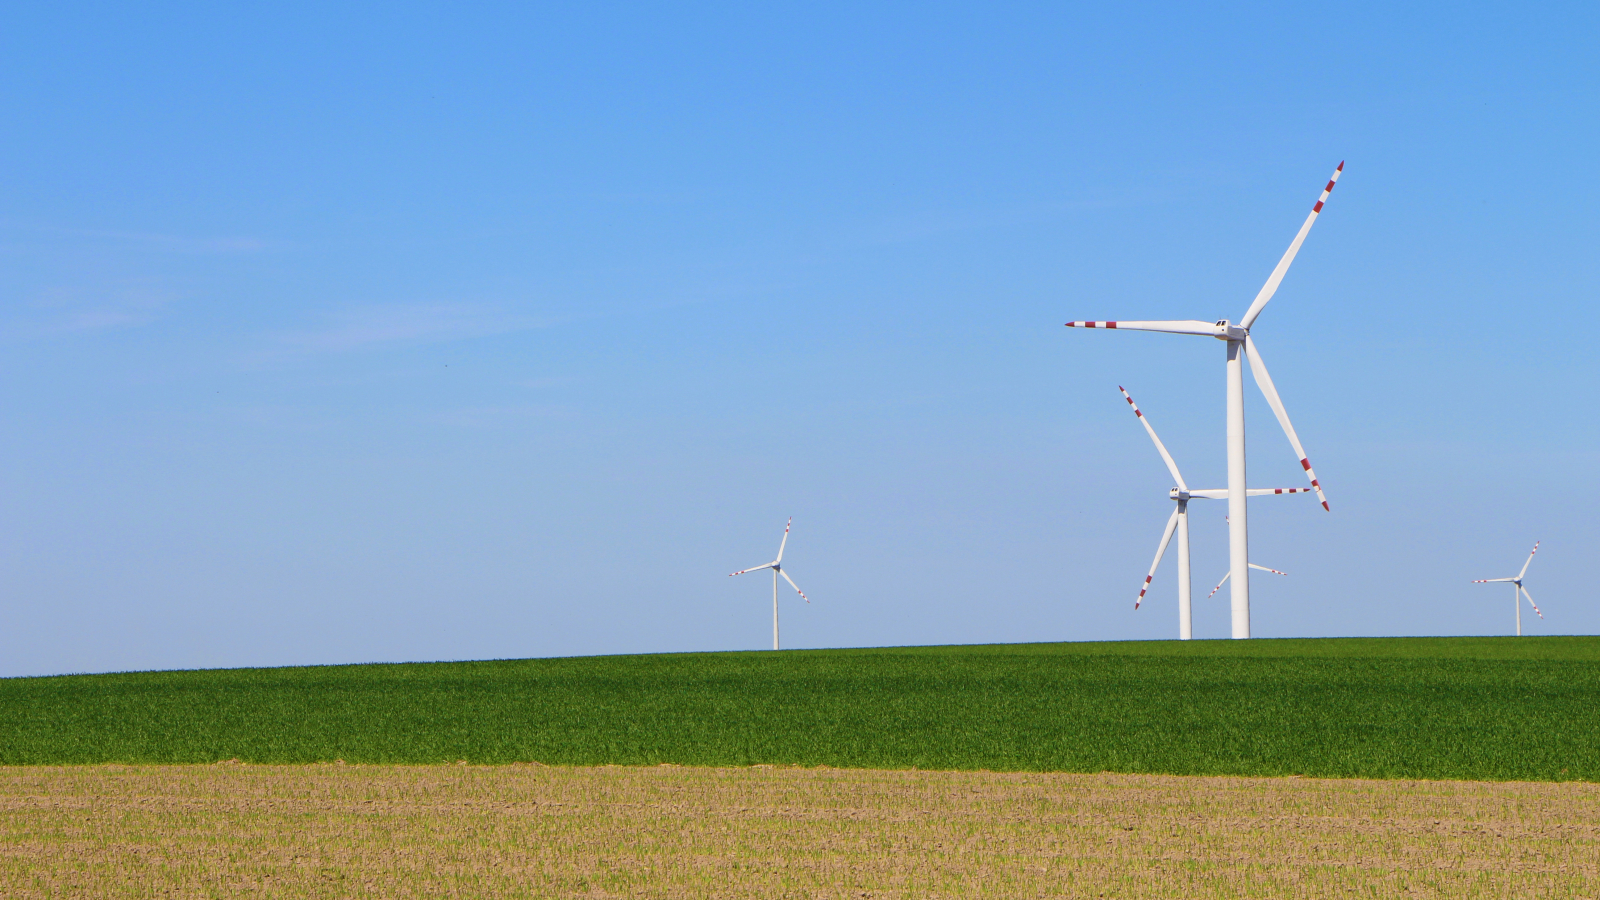 New Syvash wind farm in Ukraine set to be the biggest renewable energy project in the country